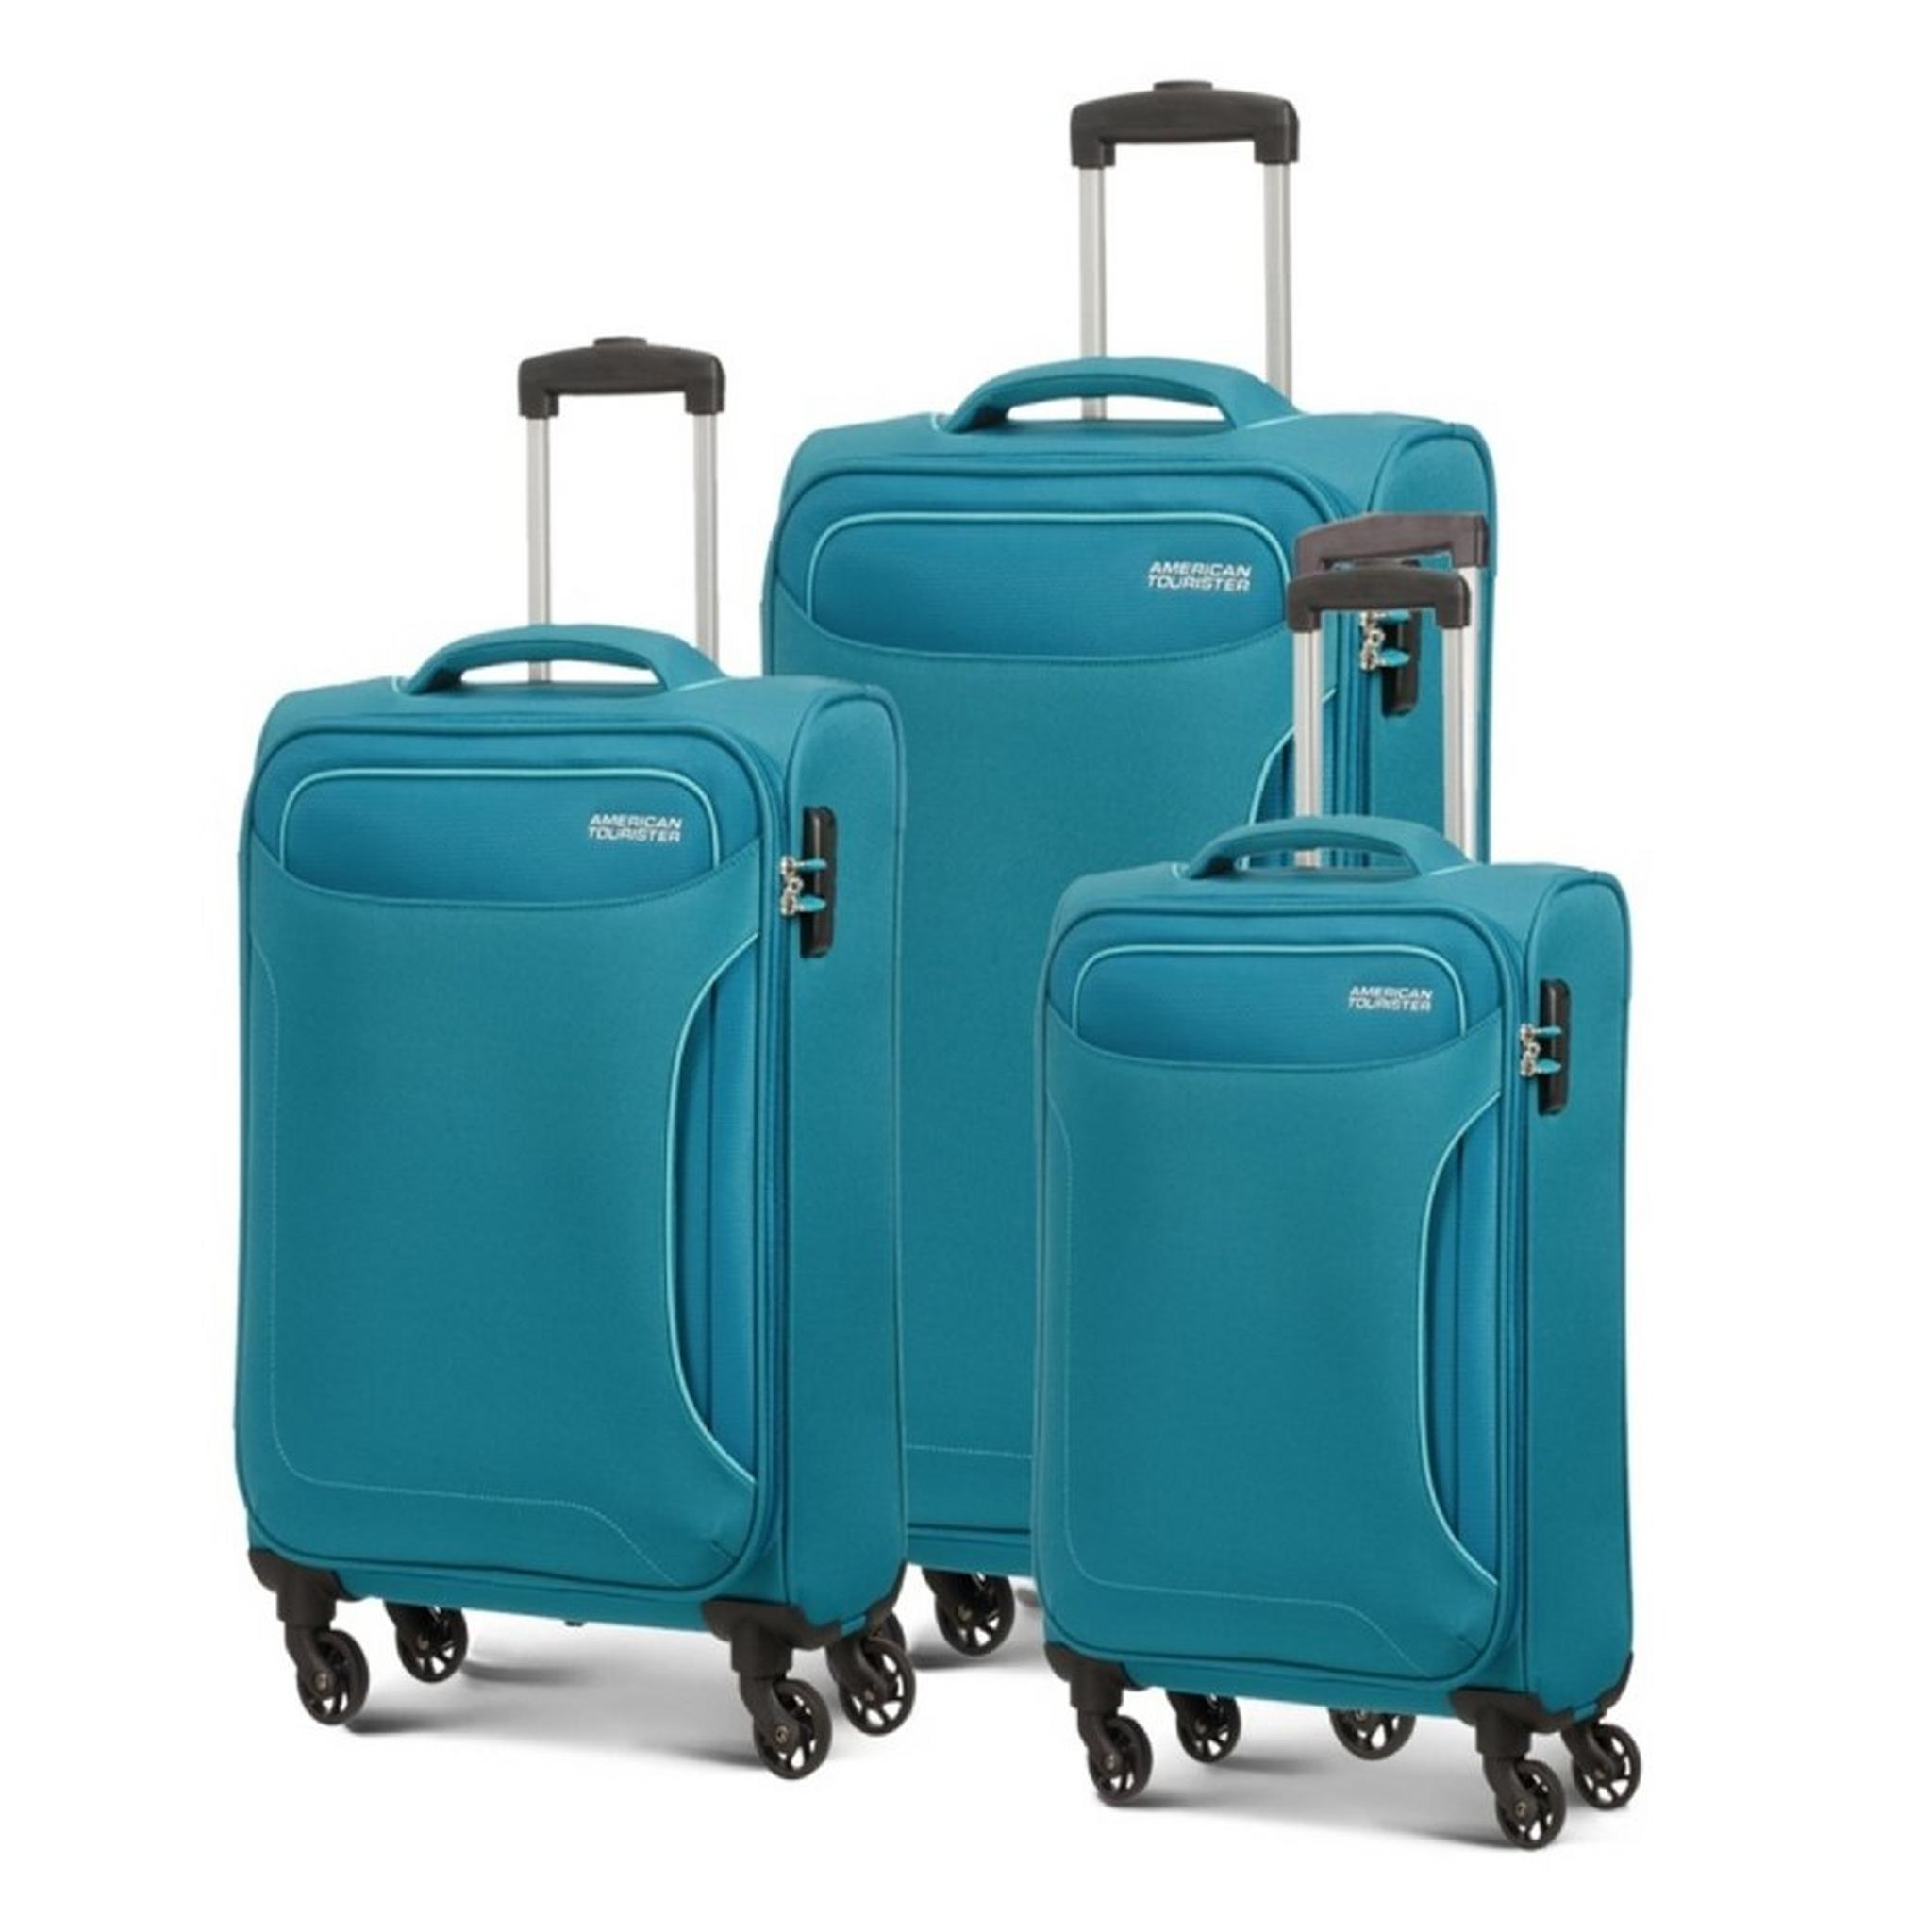 American Tourister Art Holiday (55+68+80) CM Soft Luggage Set - Teal